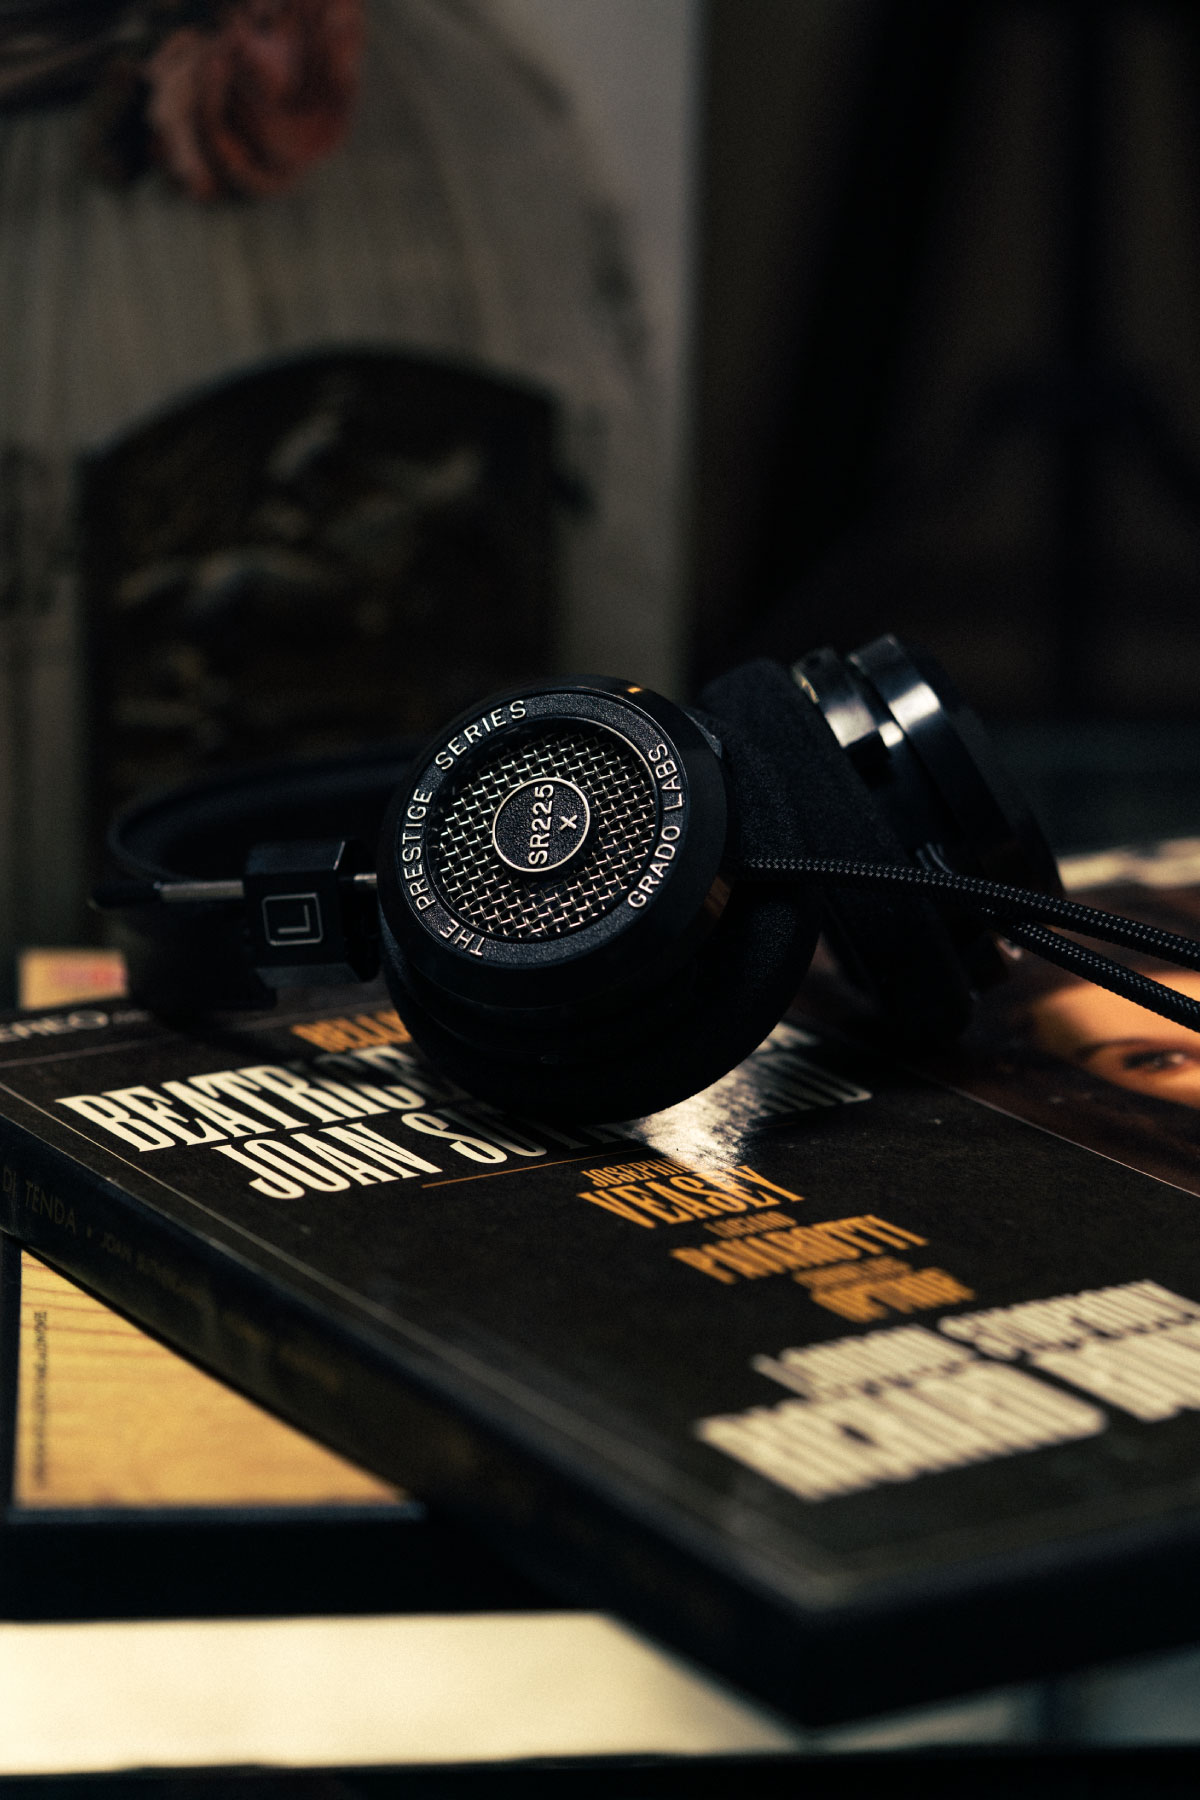 Photo of sr225x headphones resting on a black book in front of a mirror